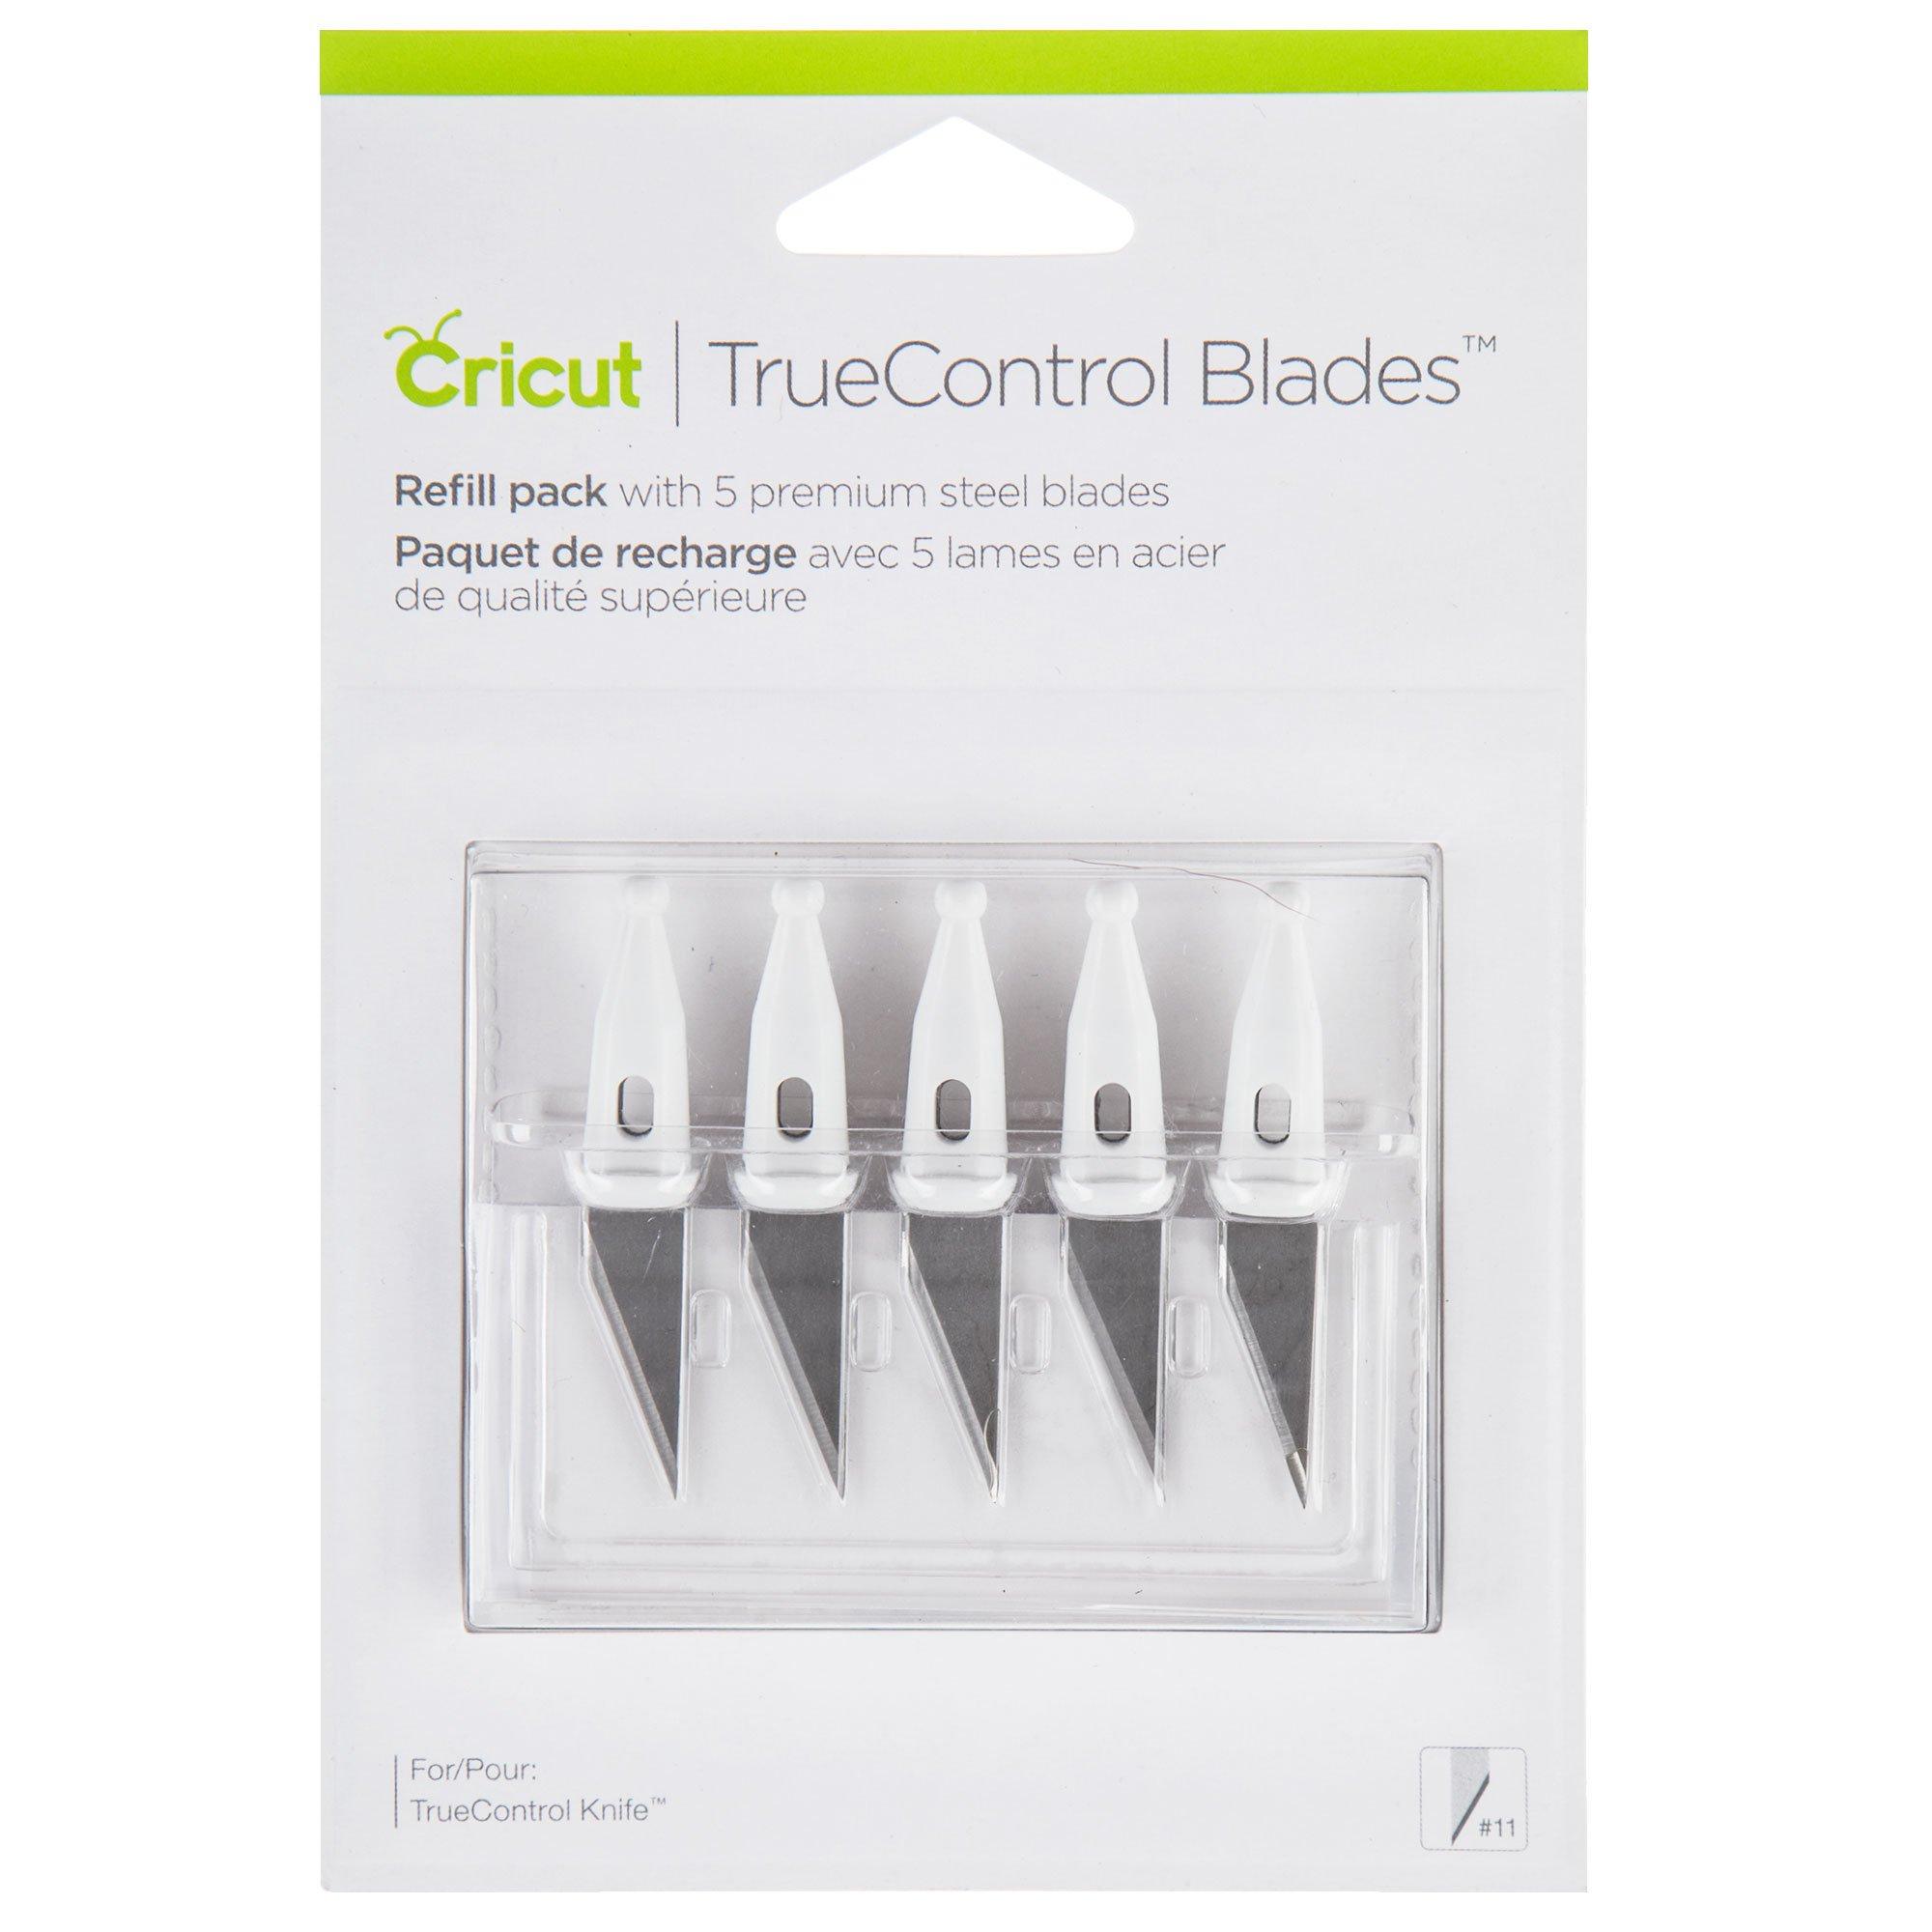 How to Change the Blade on a TrueControl Cricut Knife: Step-by